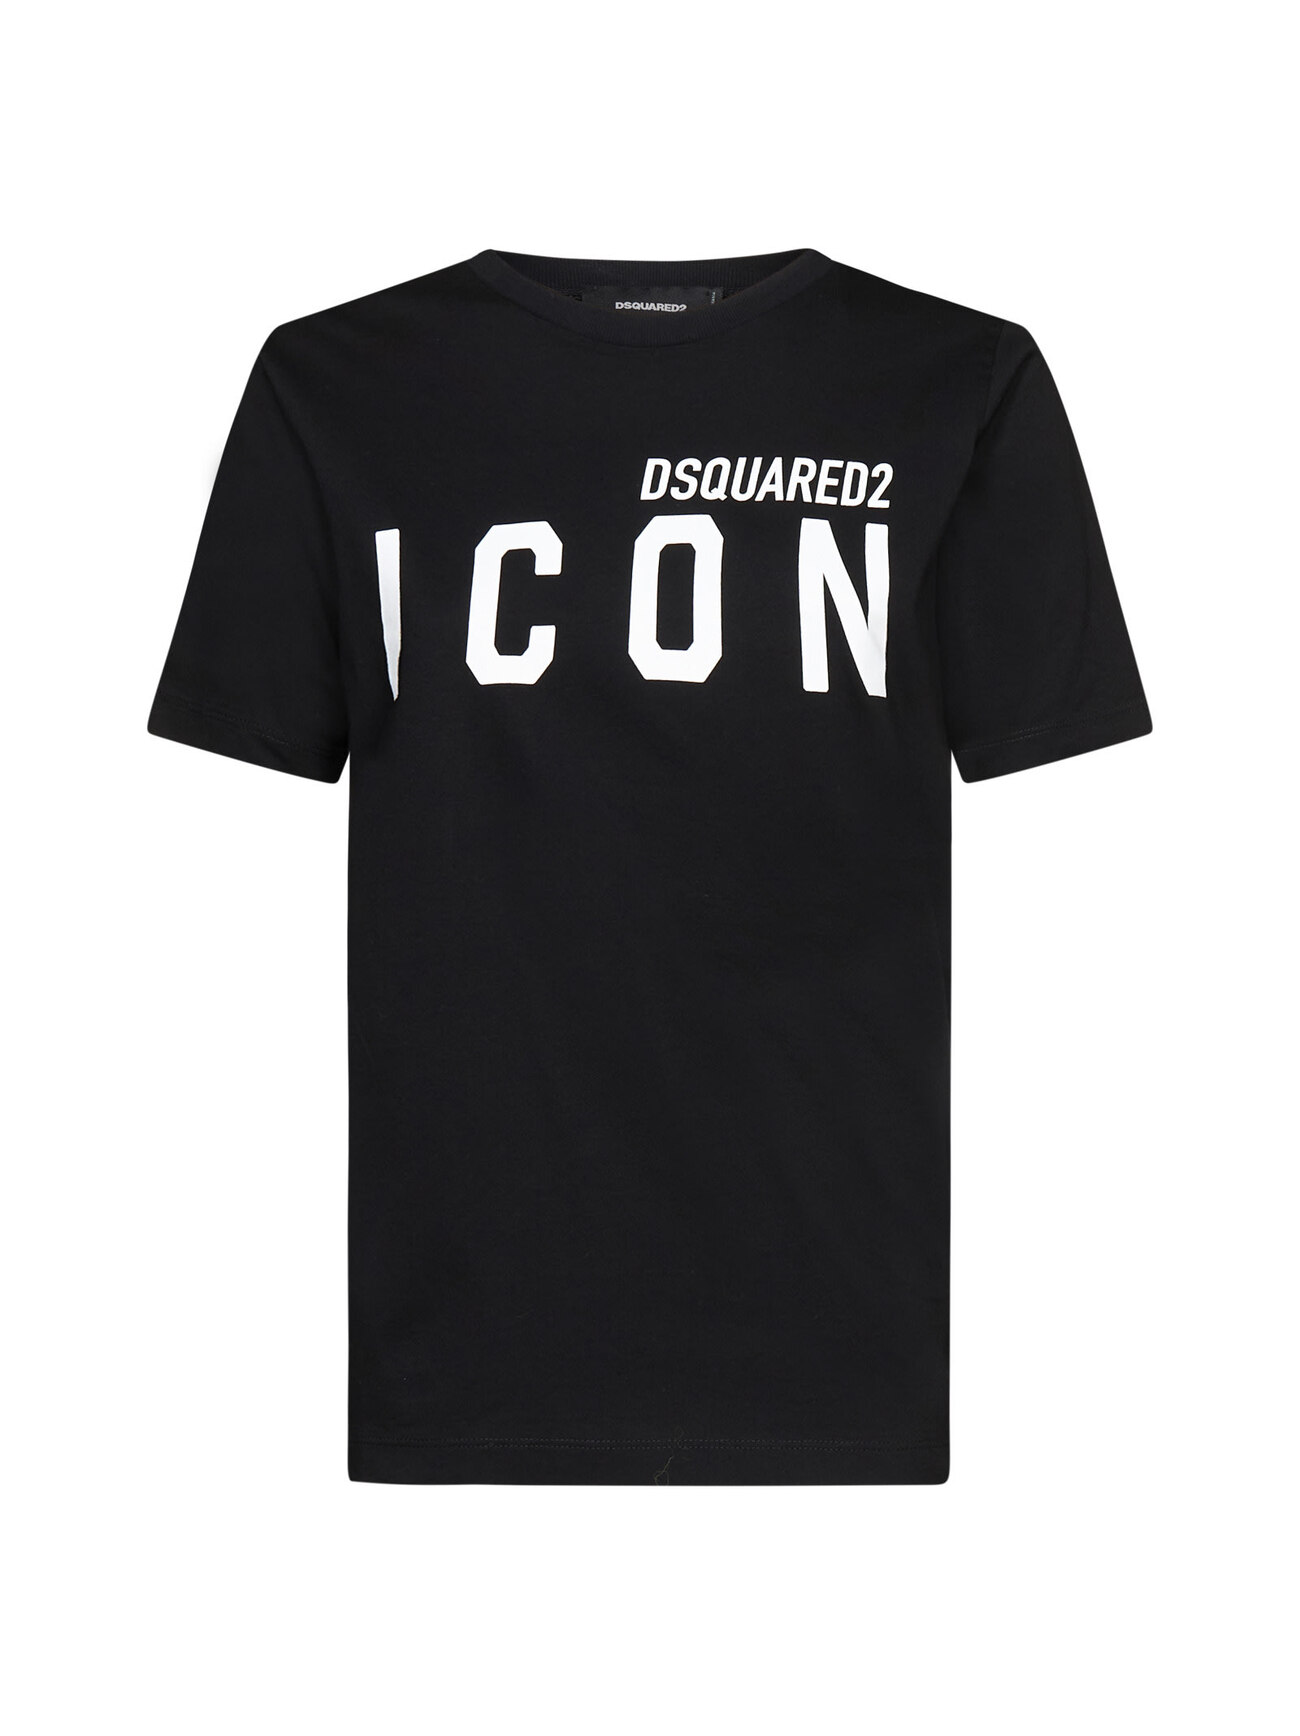 Dsquared2 T-Shirt in black / white